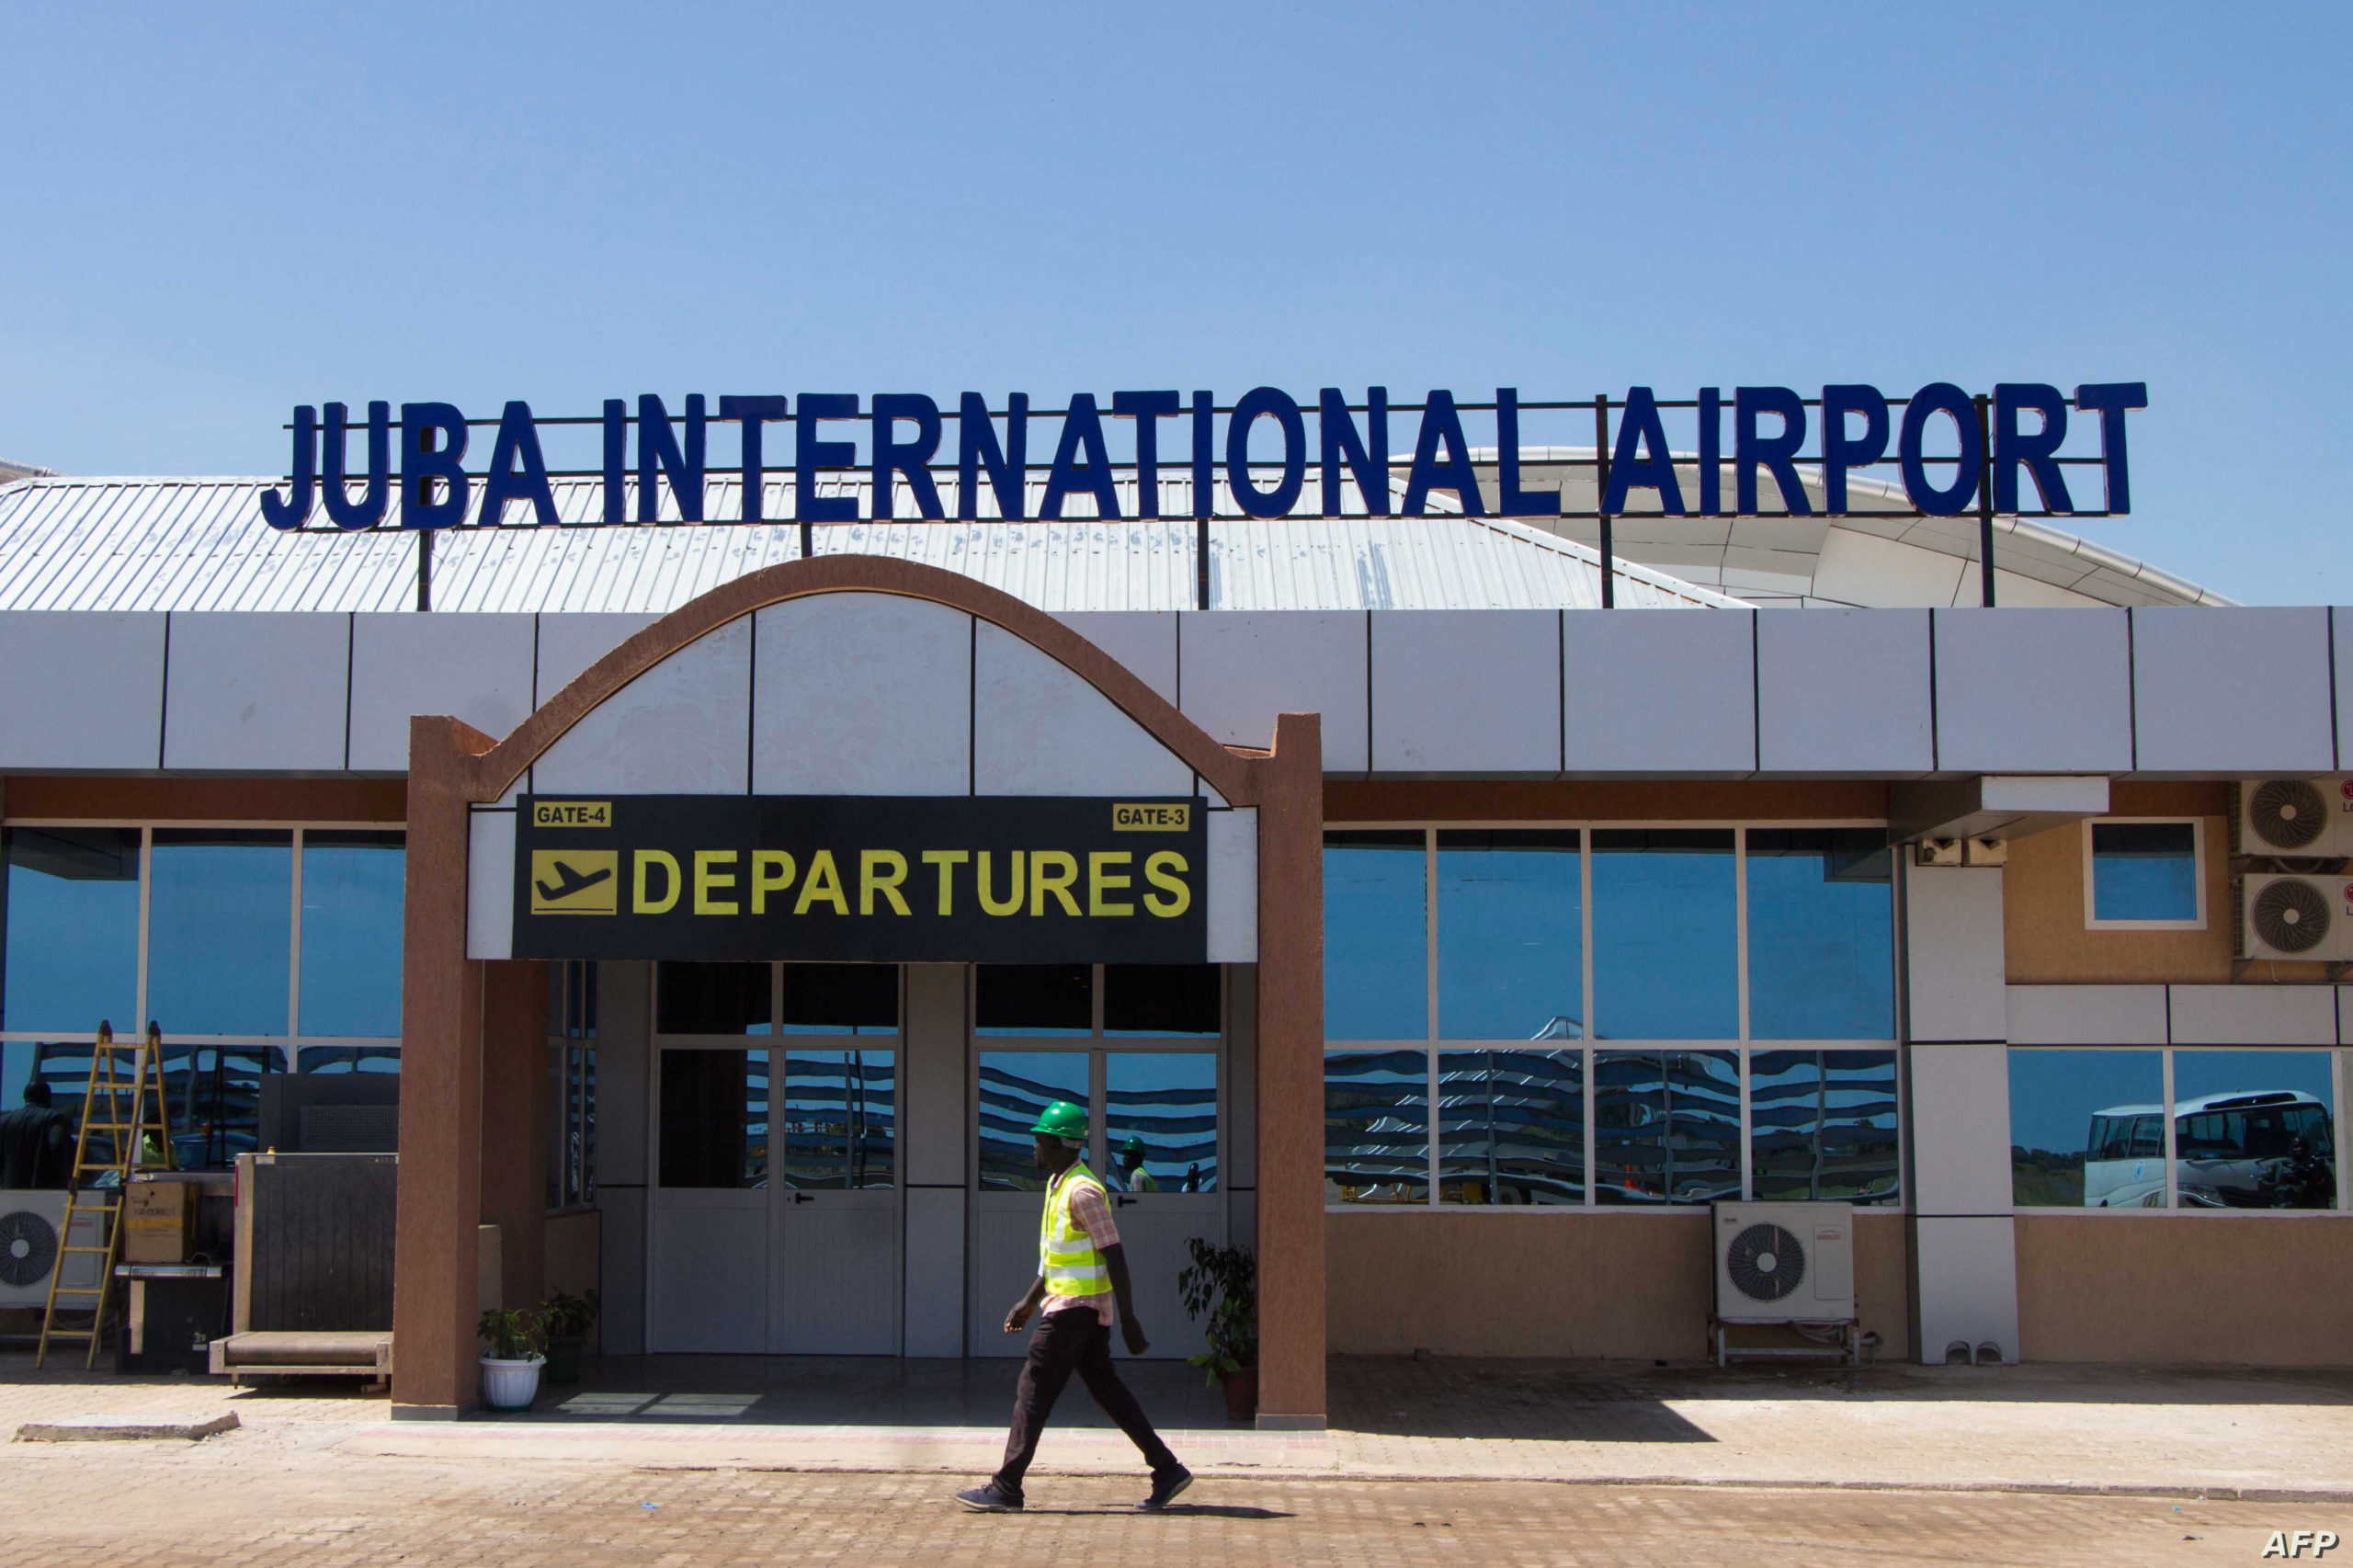 Two arrested in connection to Juba Int’l Airport burglary, police say